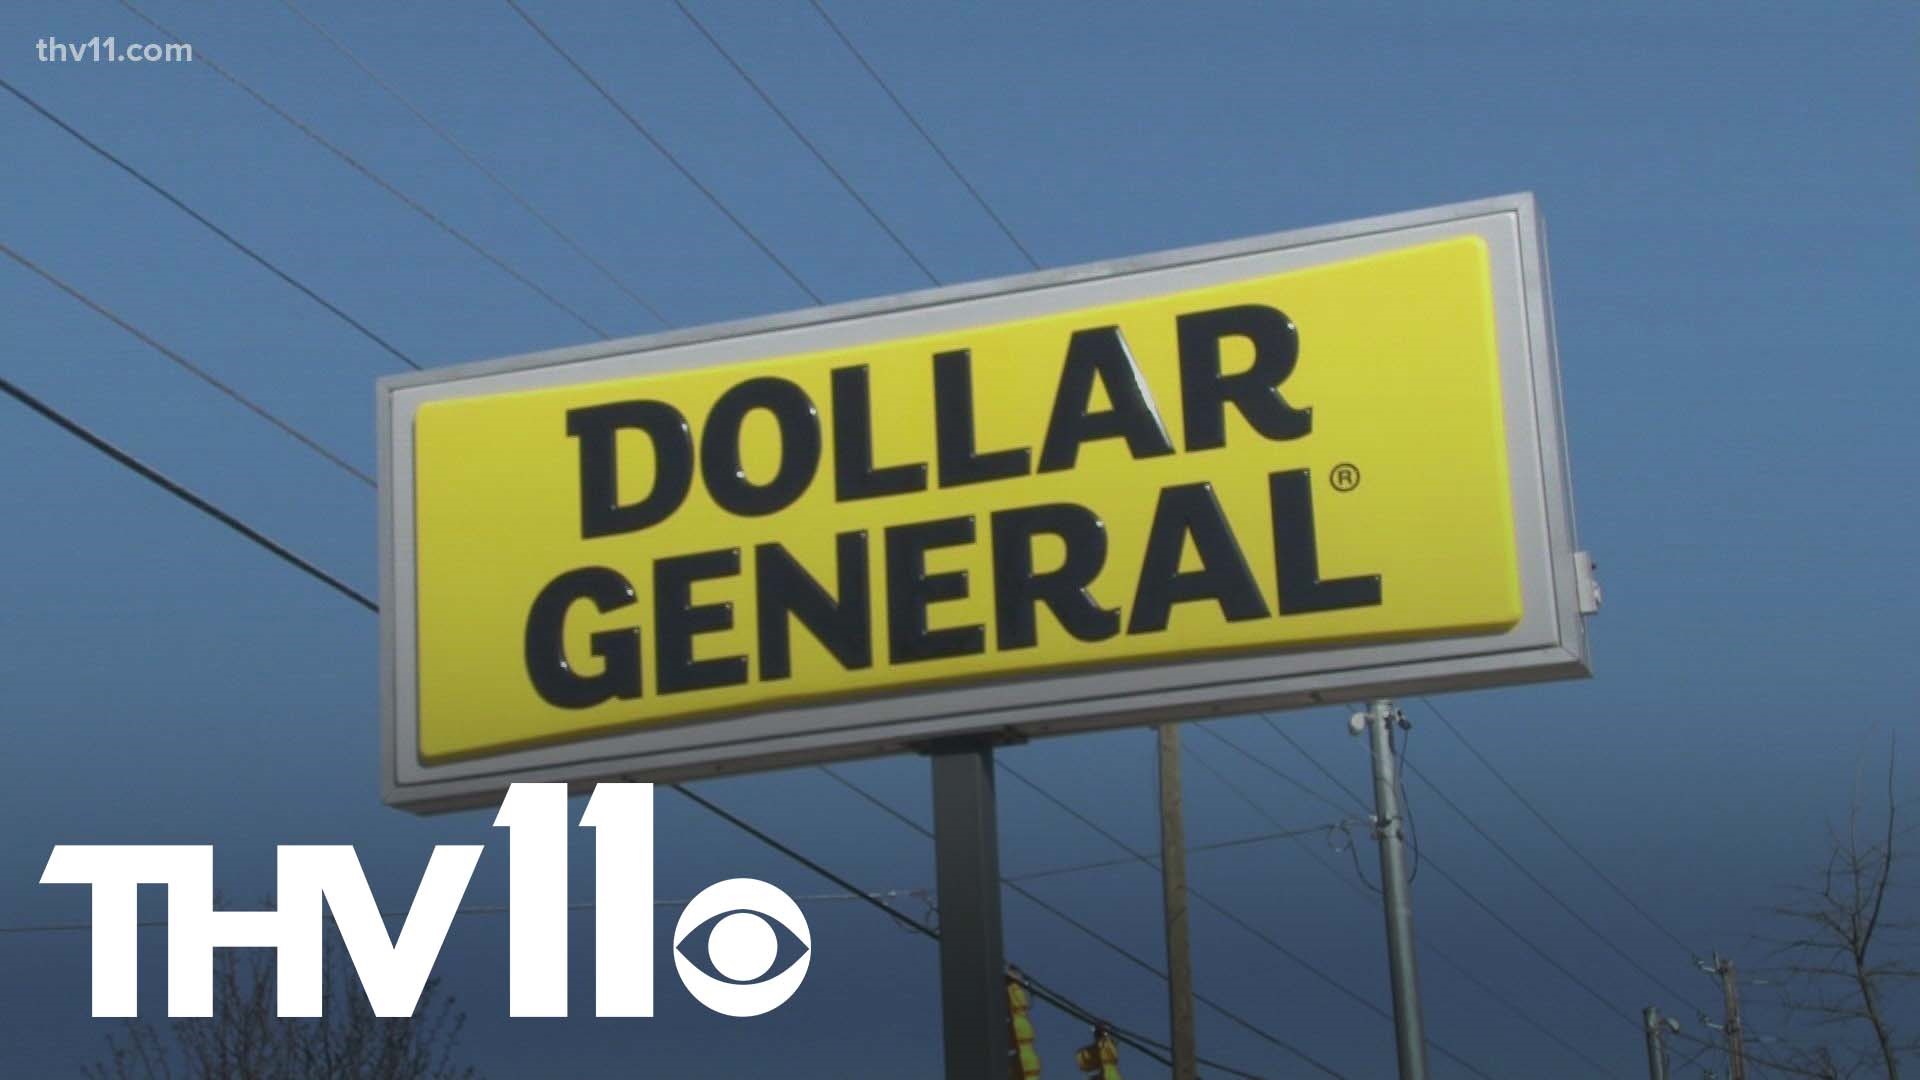 More jobs are set to come to North Little Rock soon as city officials announced plans for a new Dollar General Distribution Center.